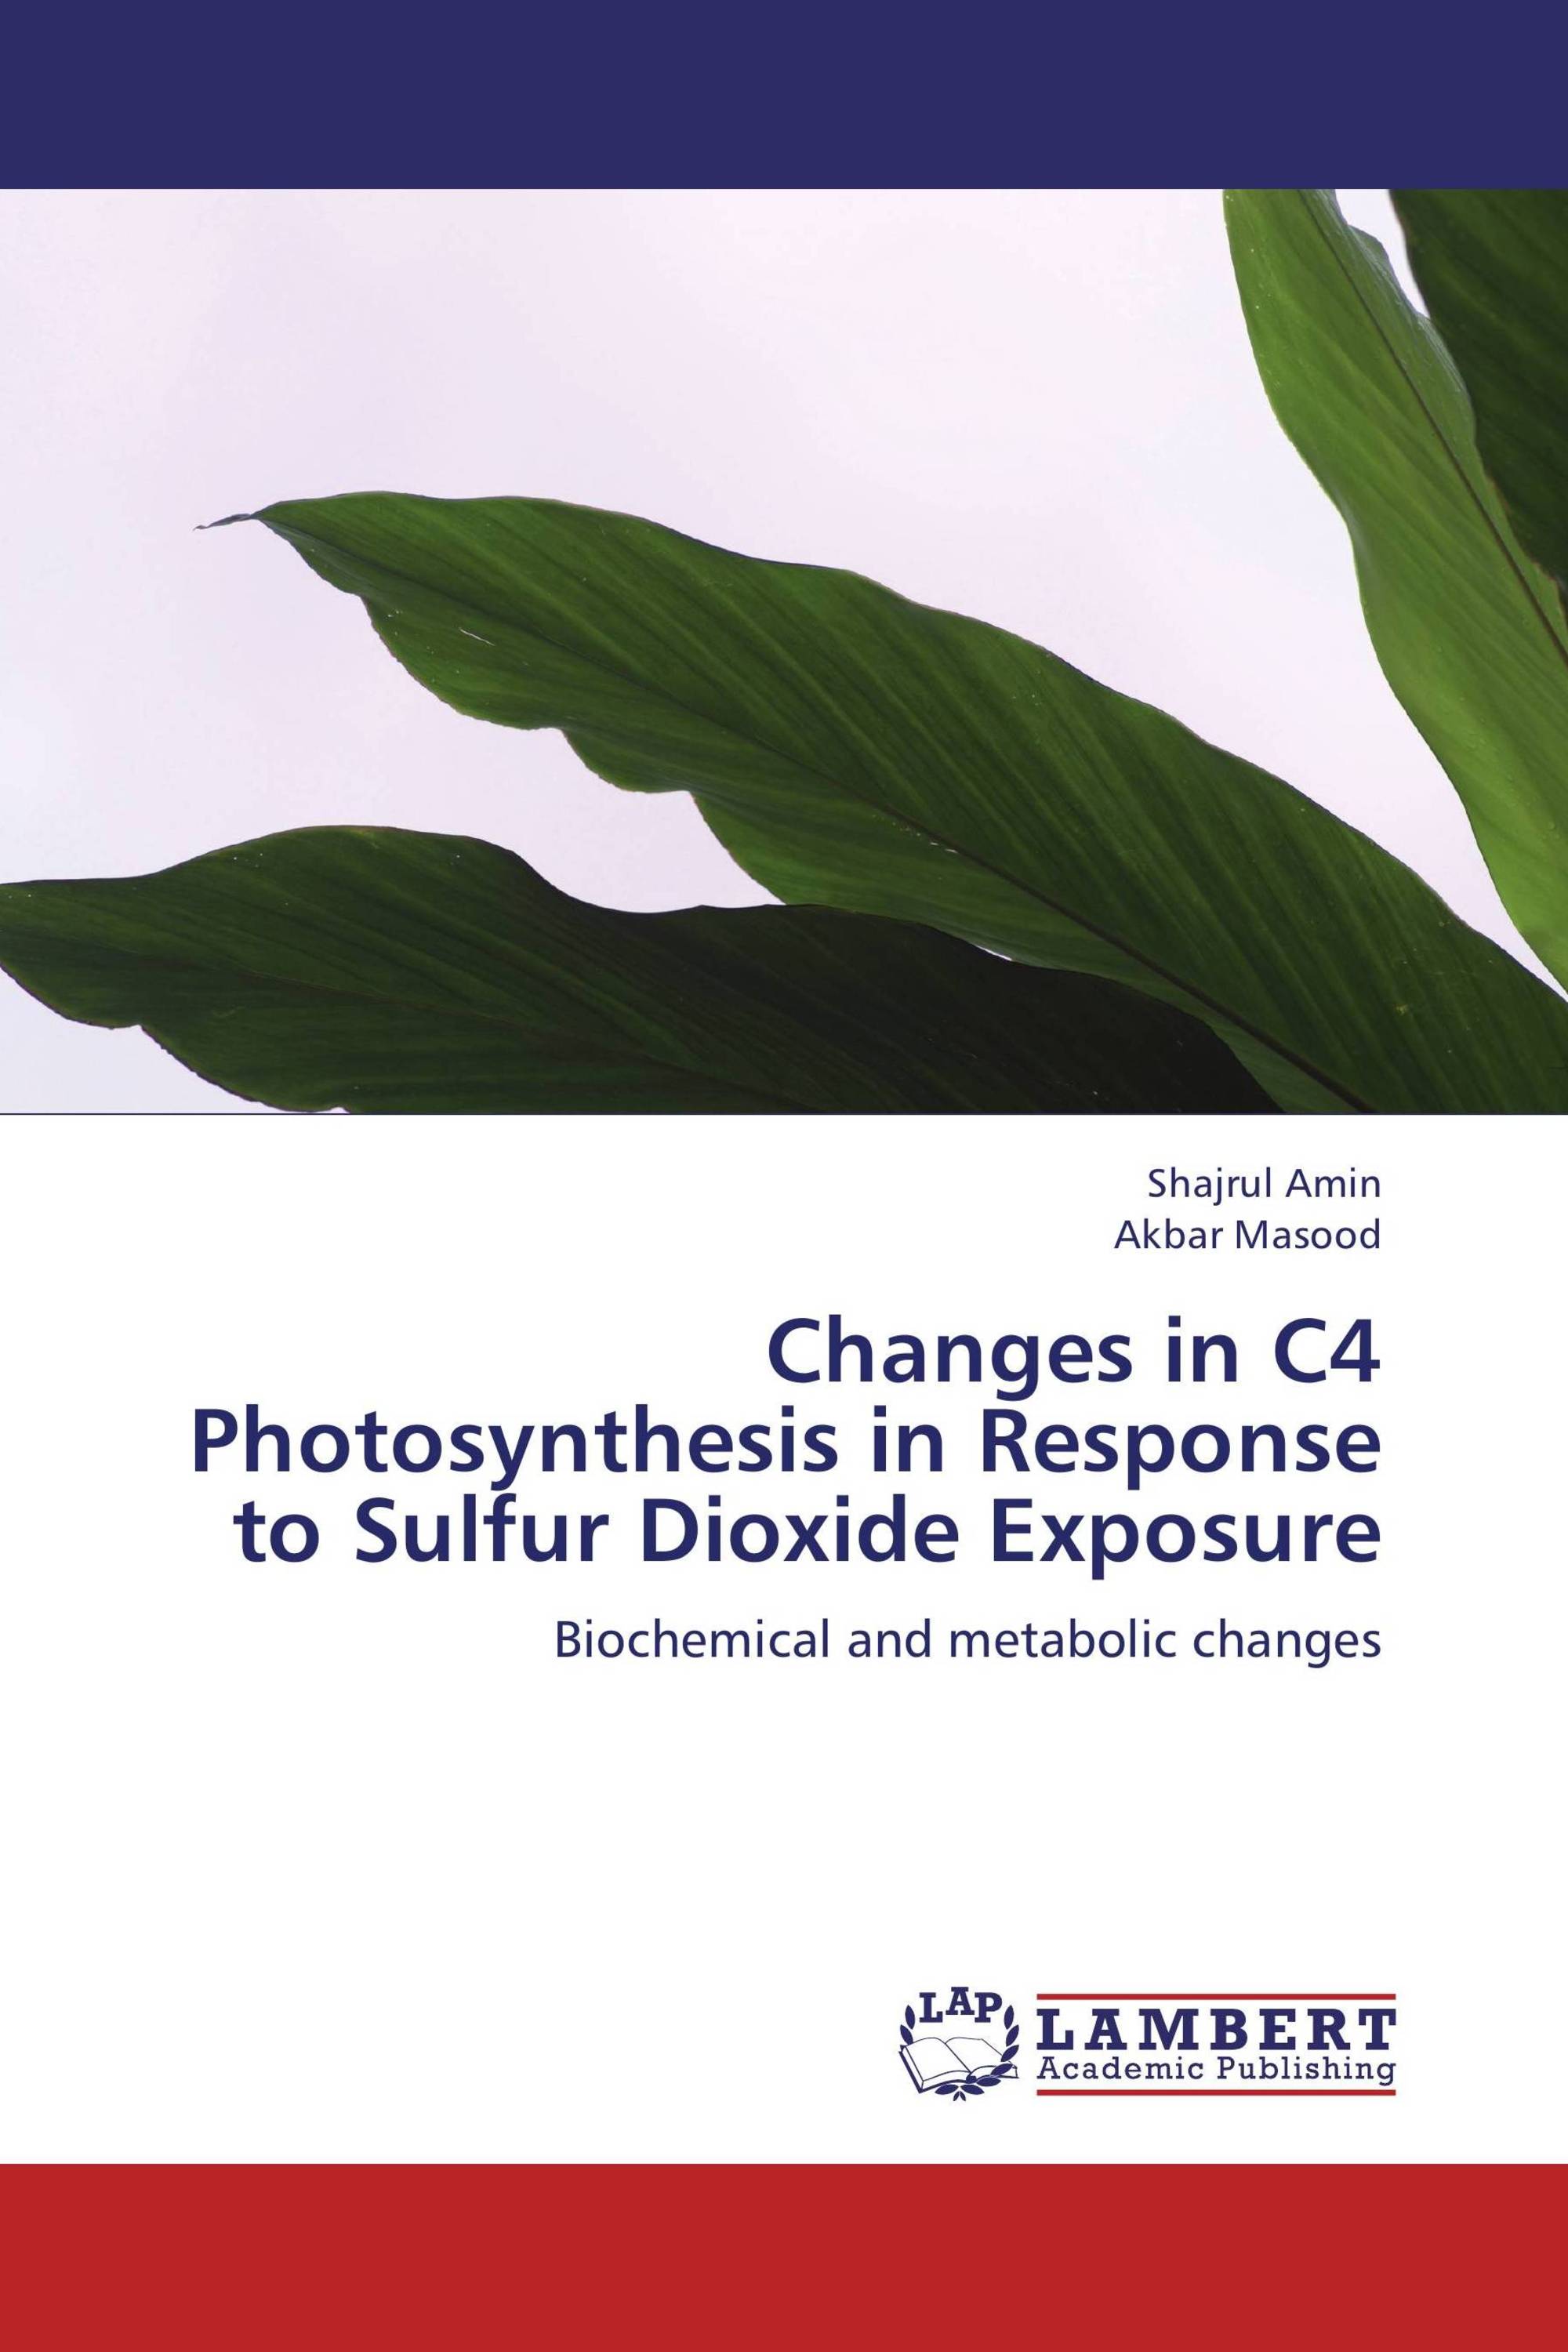 Changes in C4 Photosynthesis in Response to Sulfur Dioxide Exposure